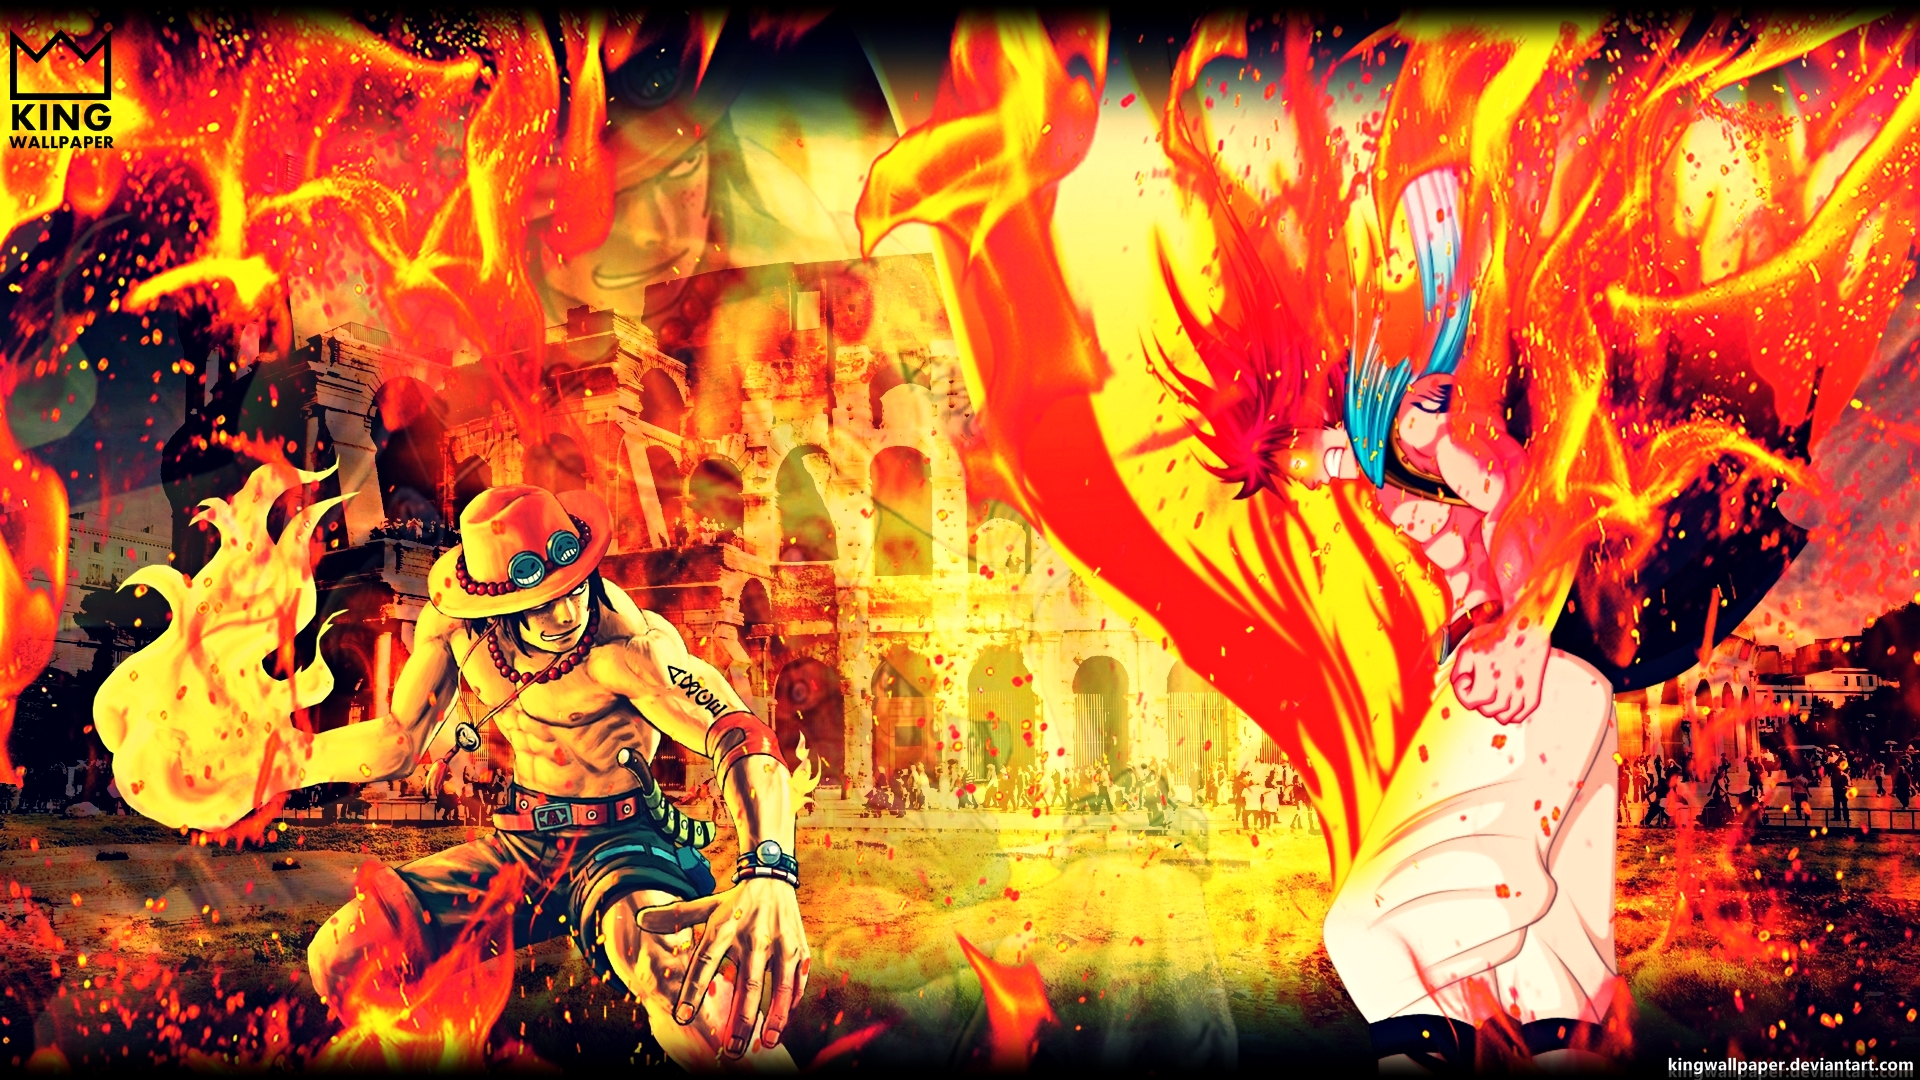 Download Portgas D. Ace Natsu Dragneel Anime Crossover HD Wallpaper by ...